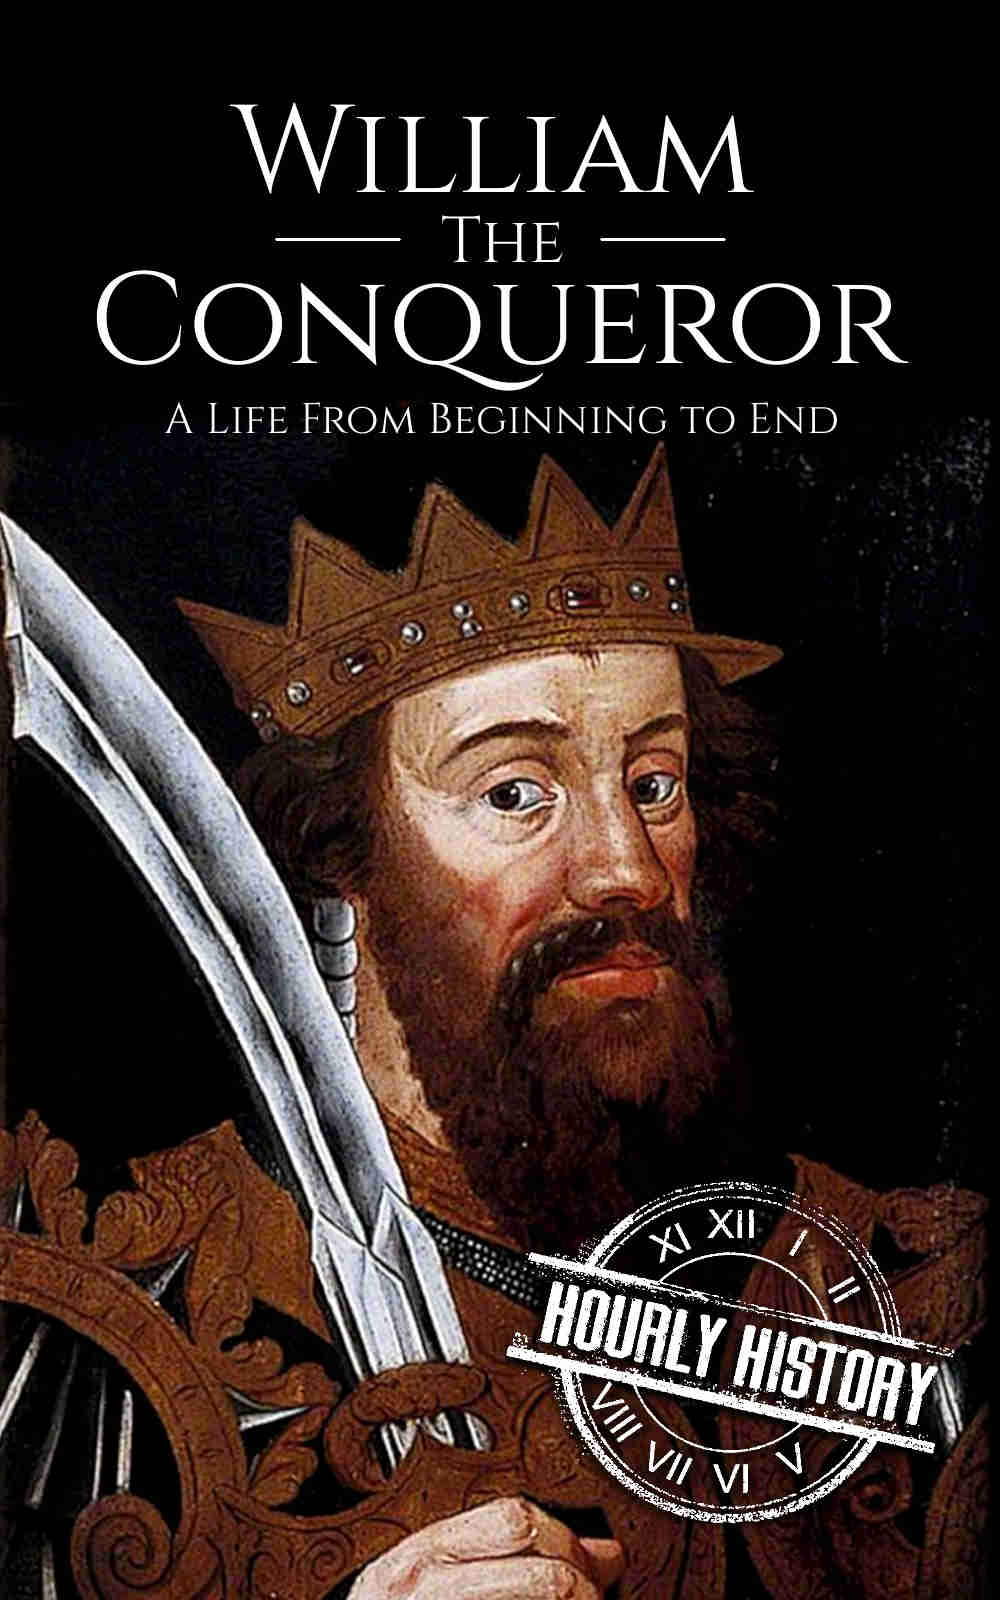 William the Conqueror Biography Facts #1 Source of History Books